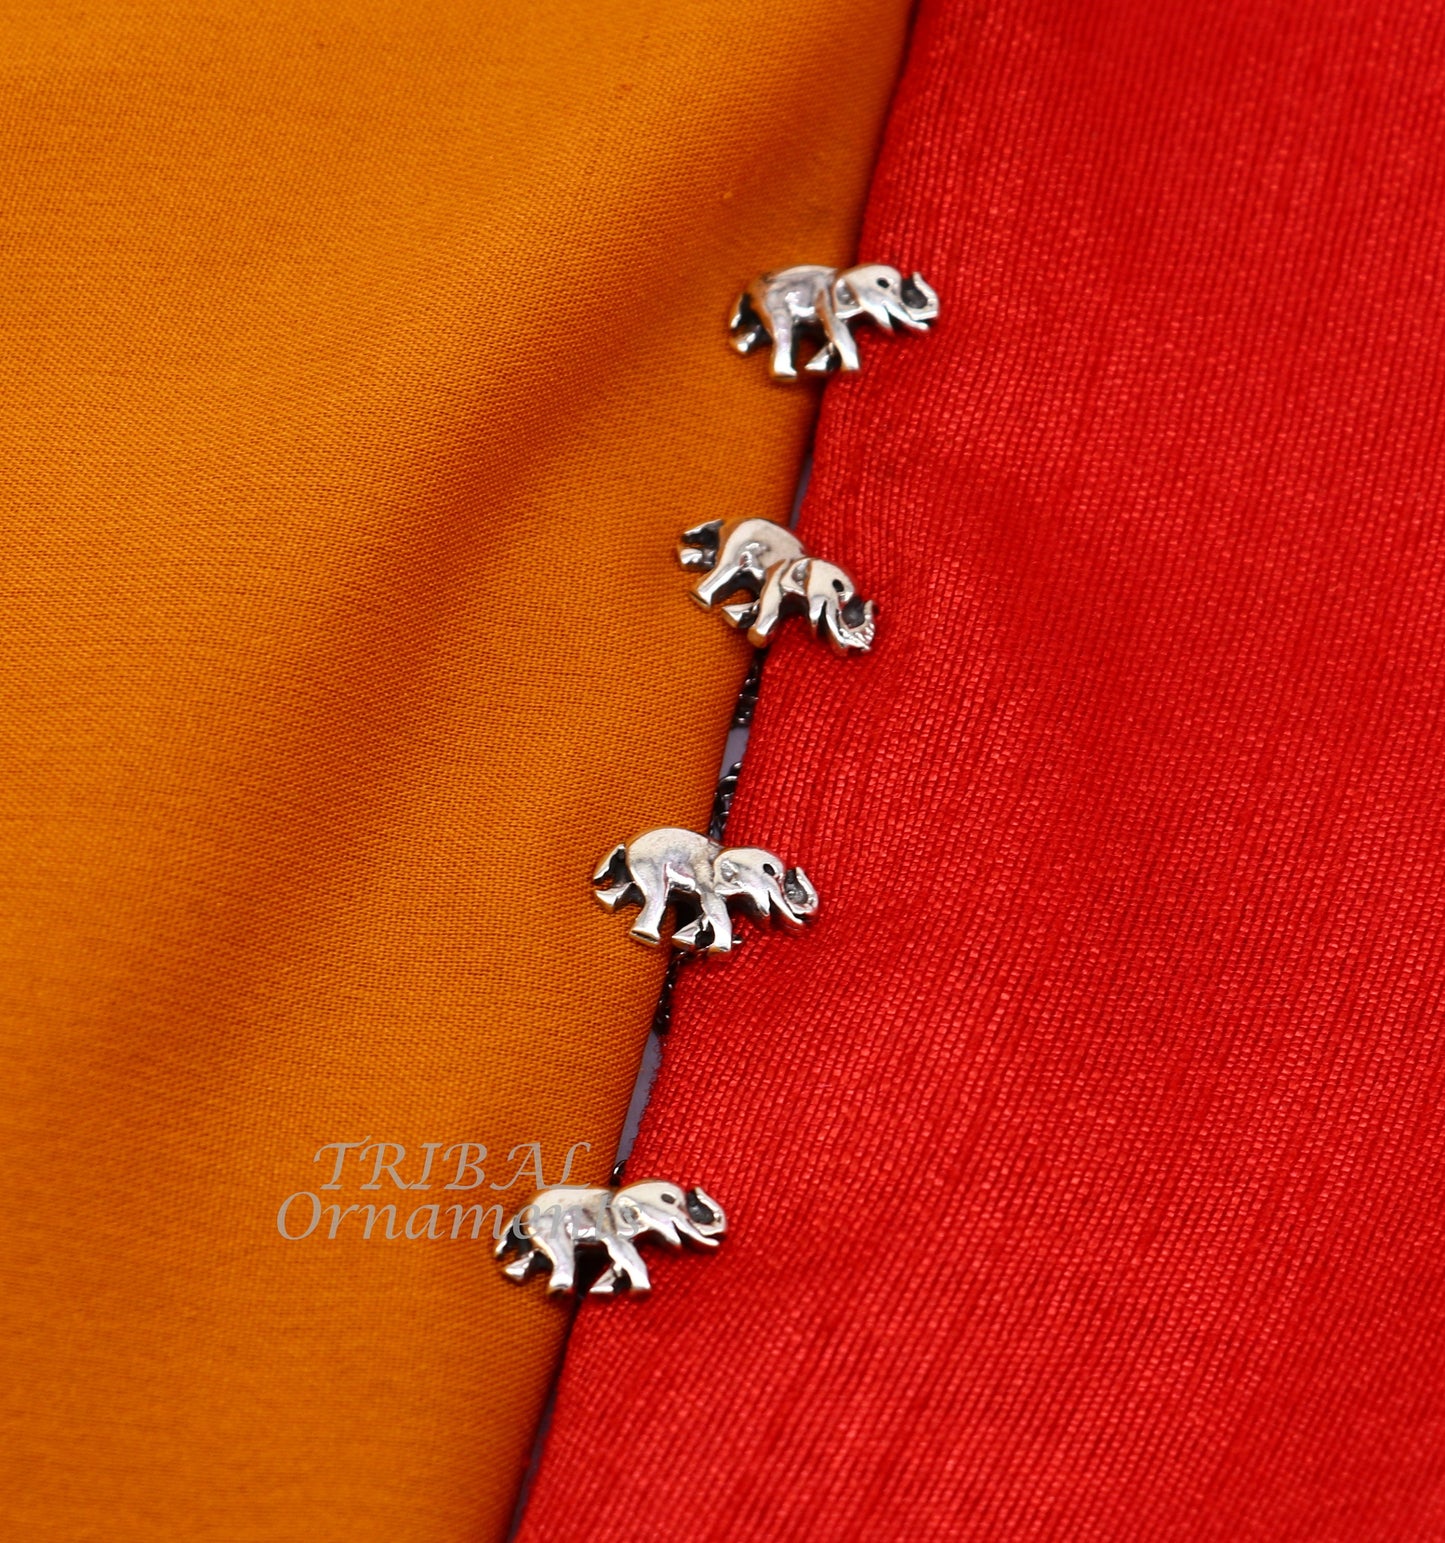 925 Sterling silver handmade amazing unique elephant shape ethnic style  design buttons for men's kurta, best gifting accessories btn15 - TRIBAL ORNAMENTS